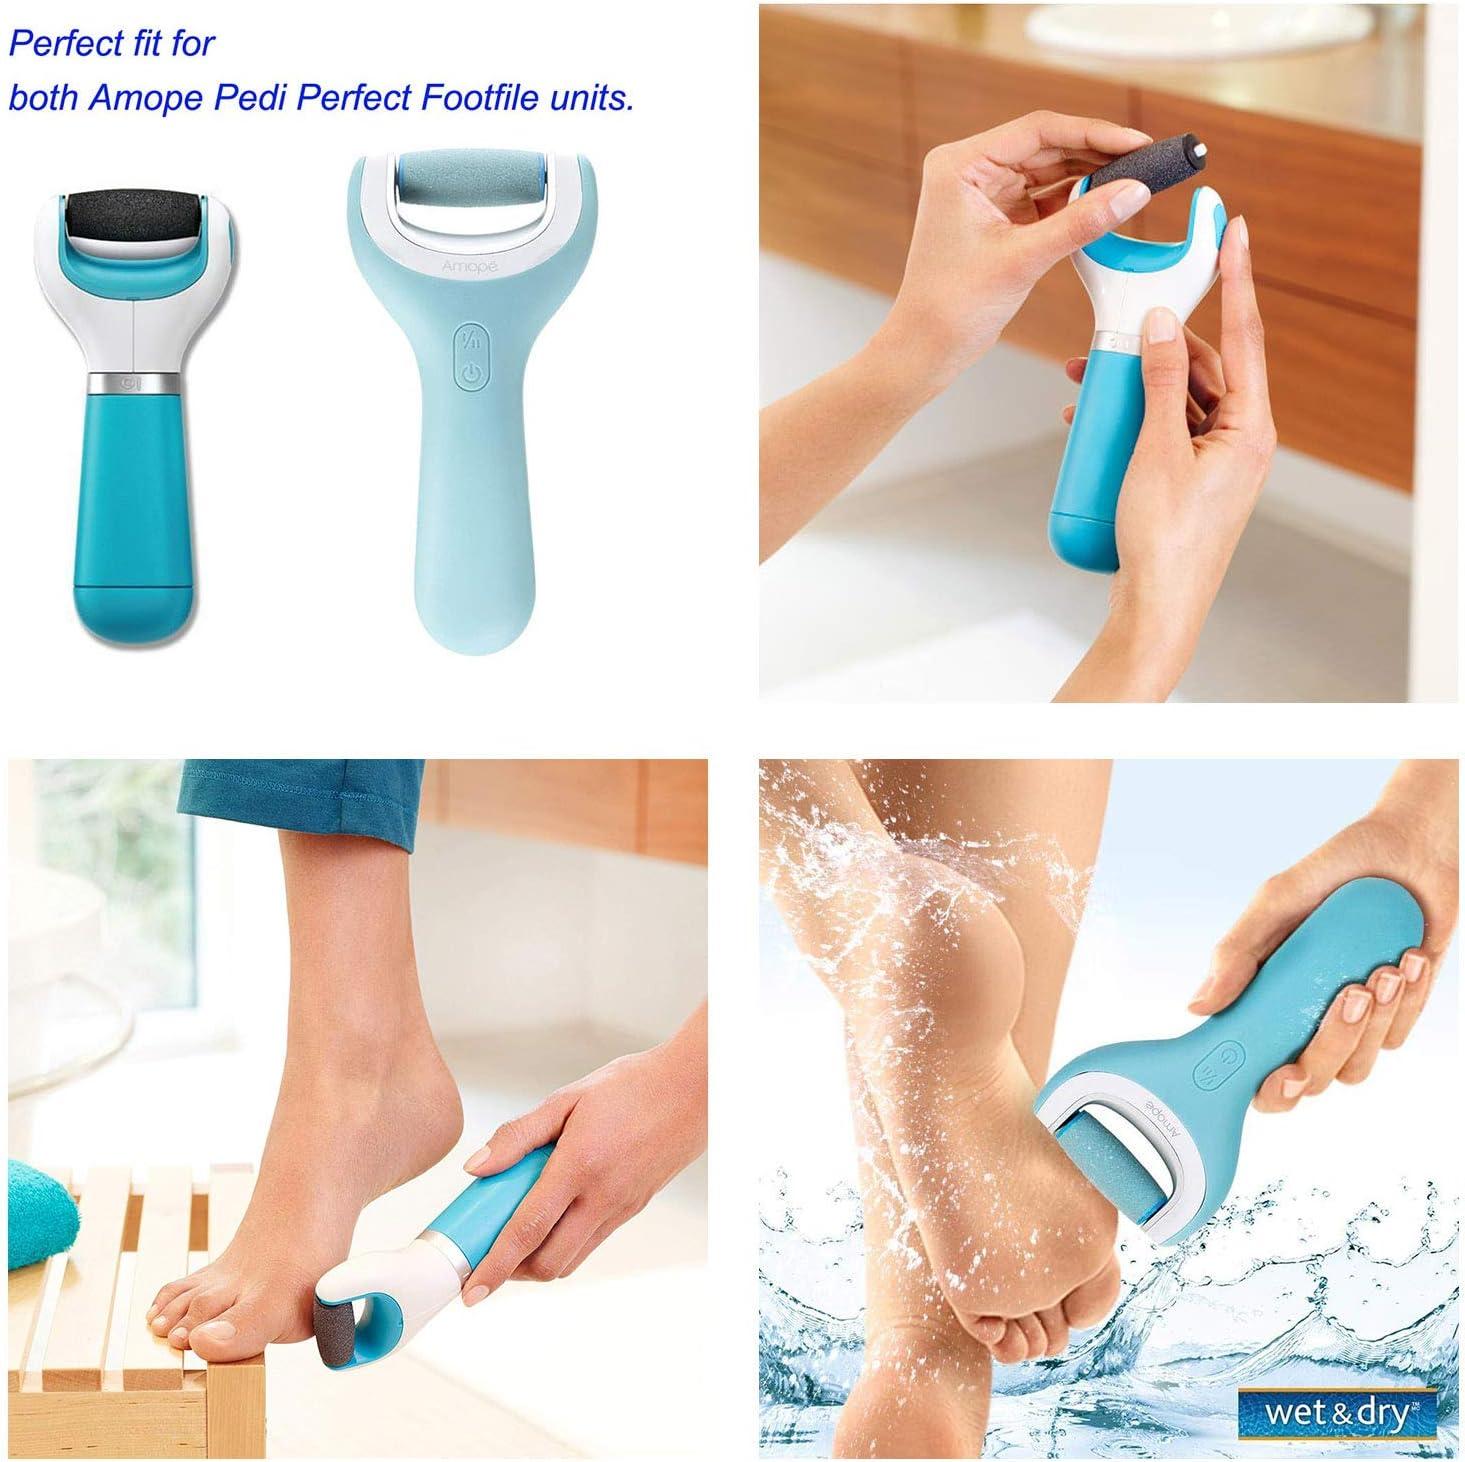 Amope Pedi Perfect Electronic Foot File With 3 New Roller Head Refills